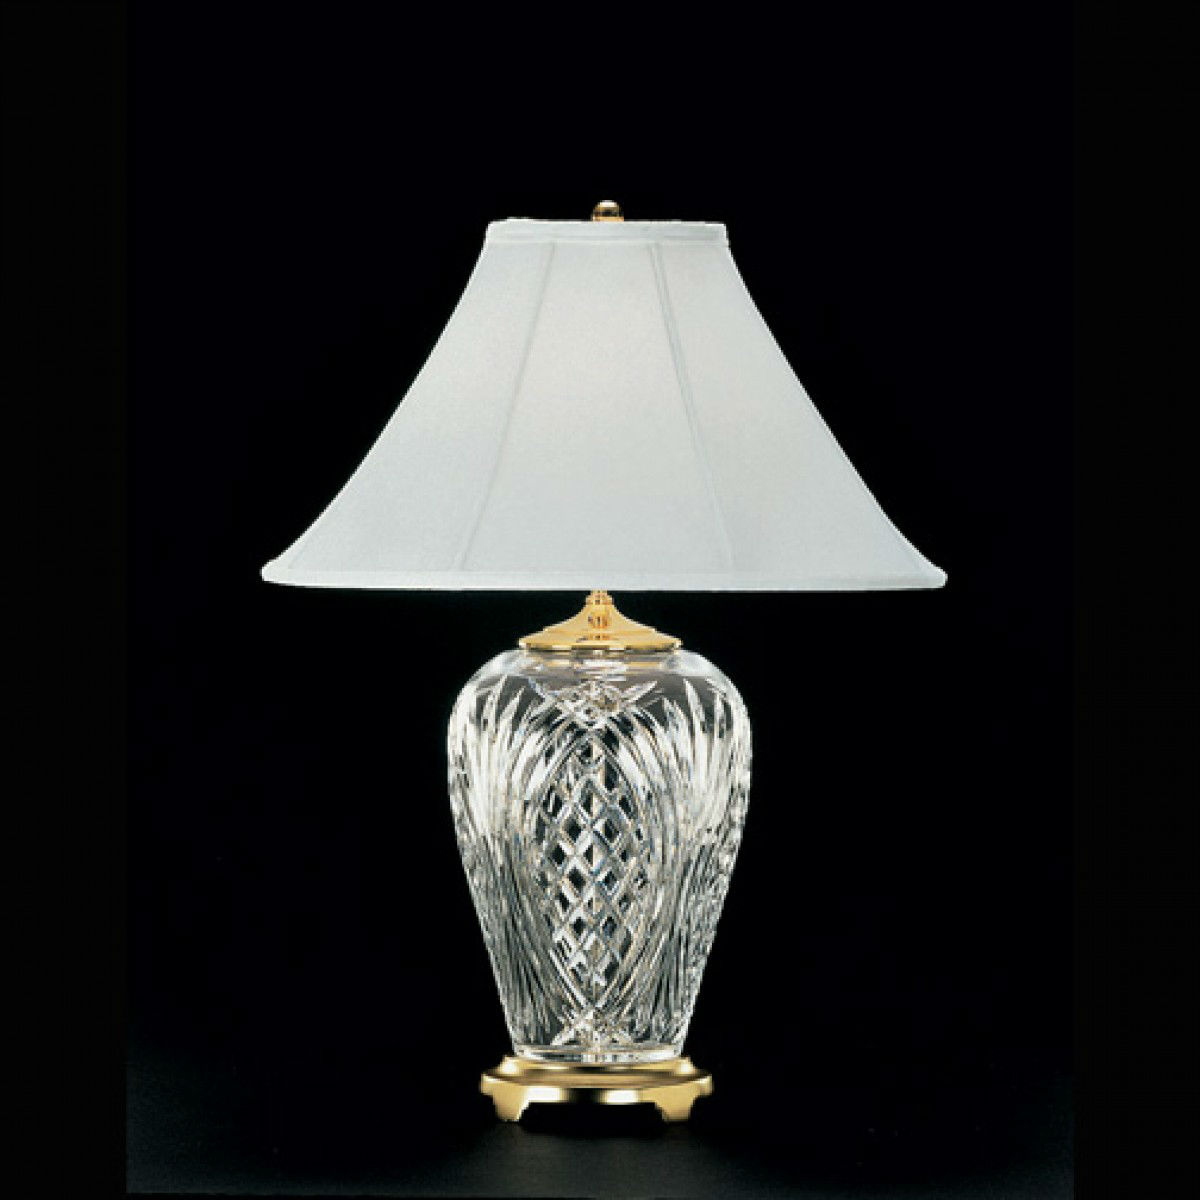 Waterford kilkenny 29 inch table lamp